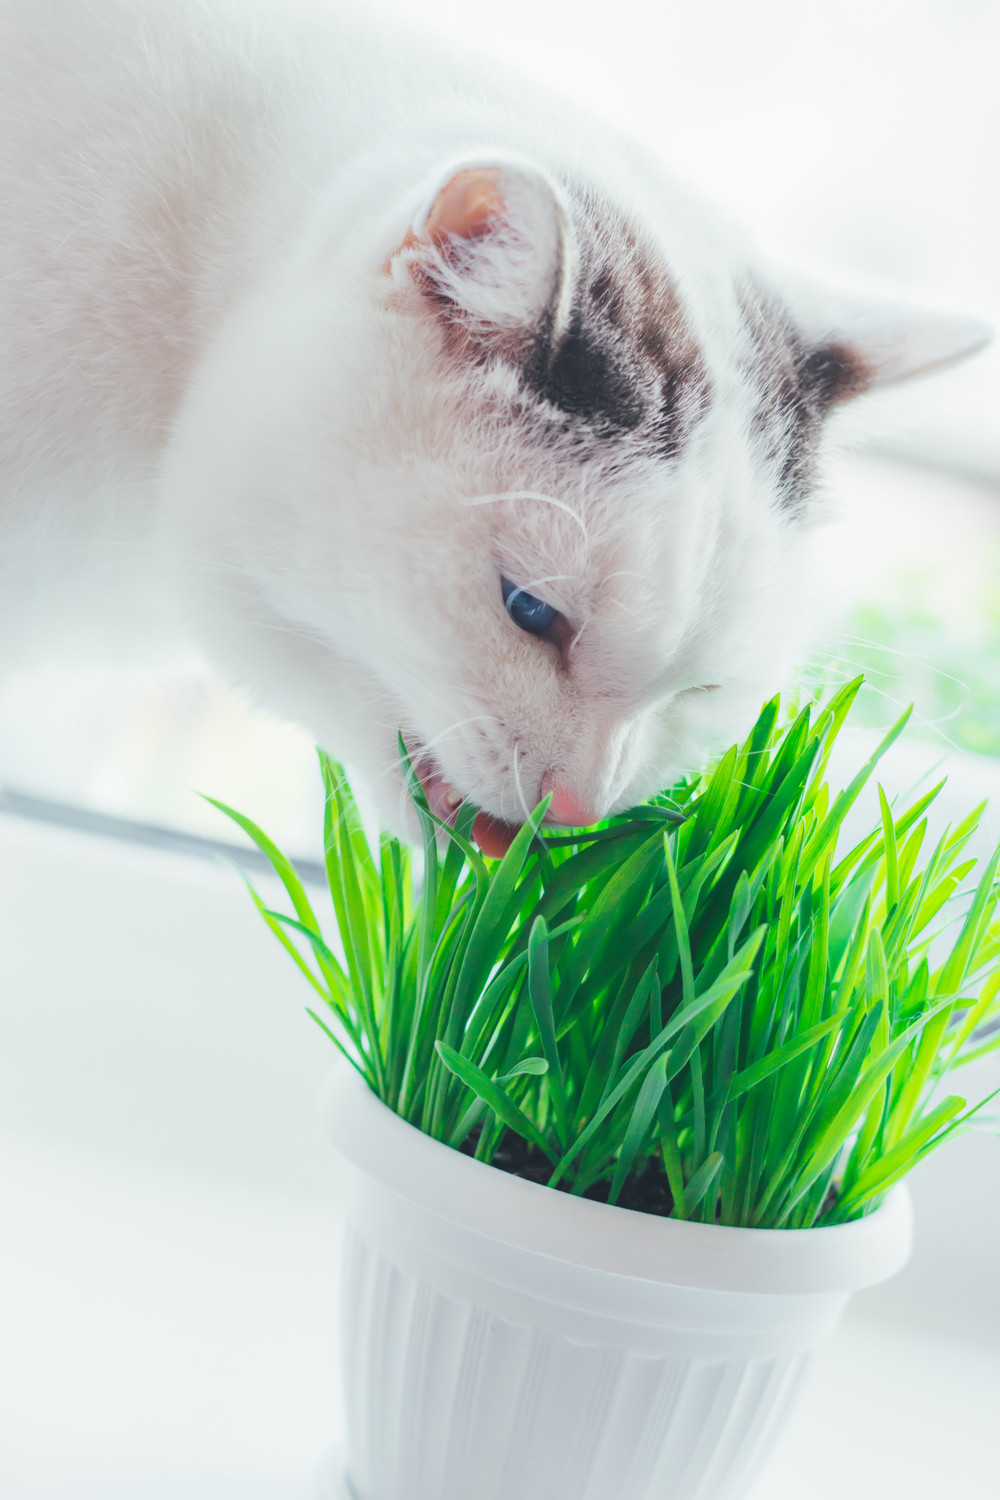 Is it safe for cats to eat grass